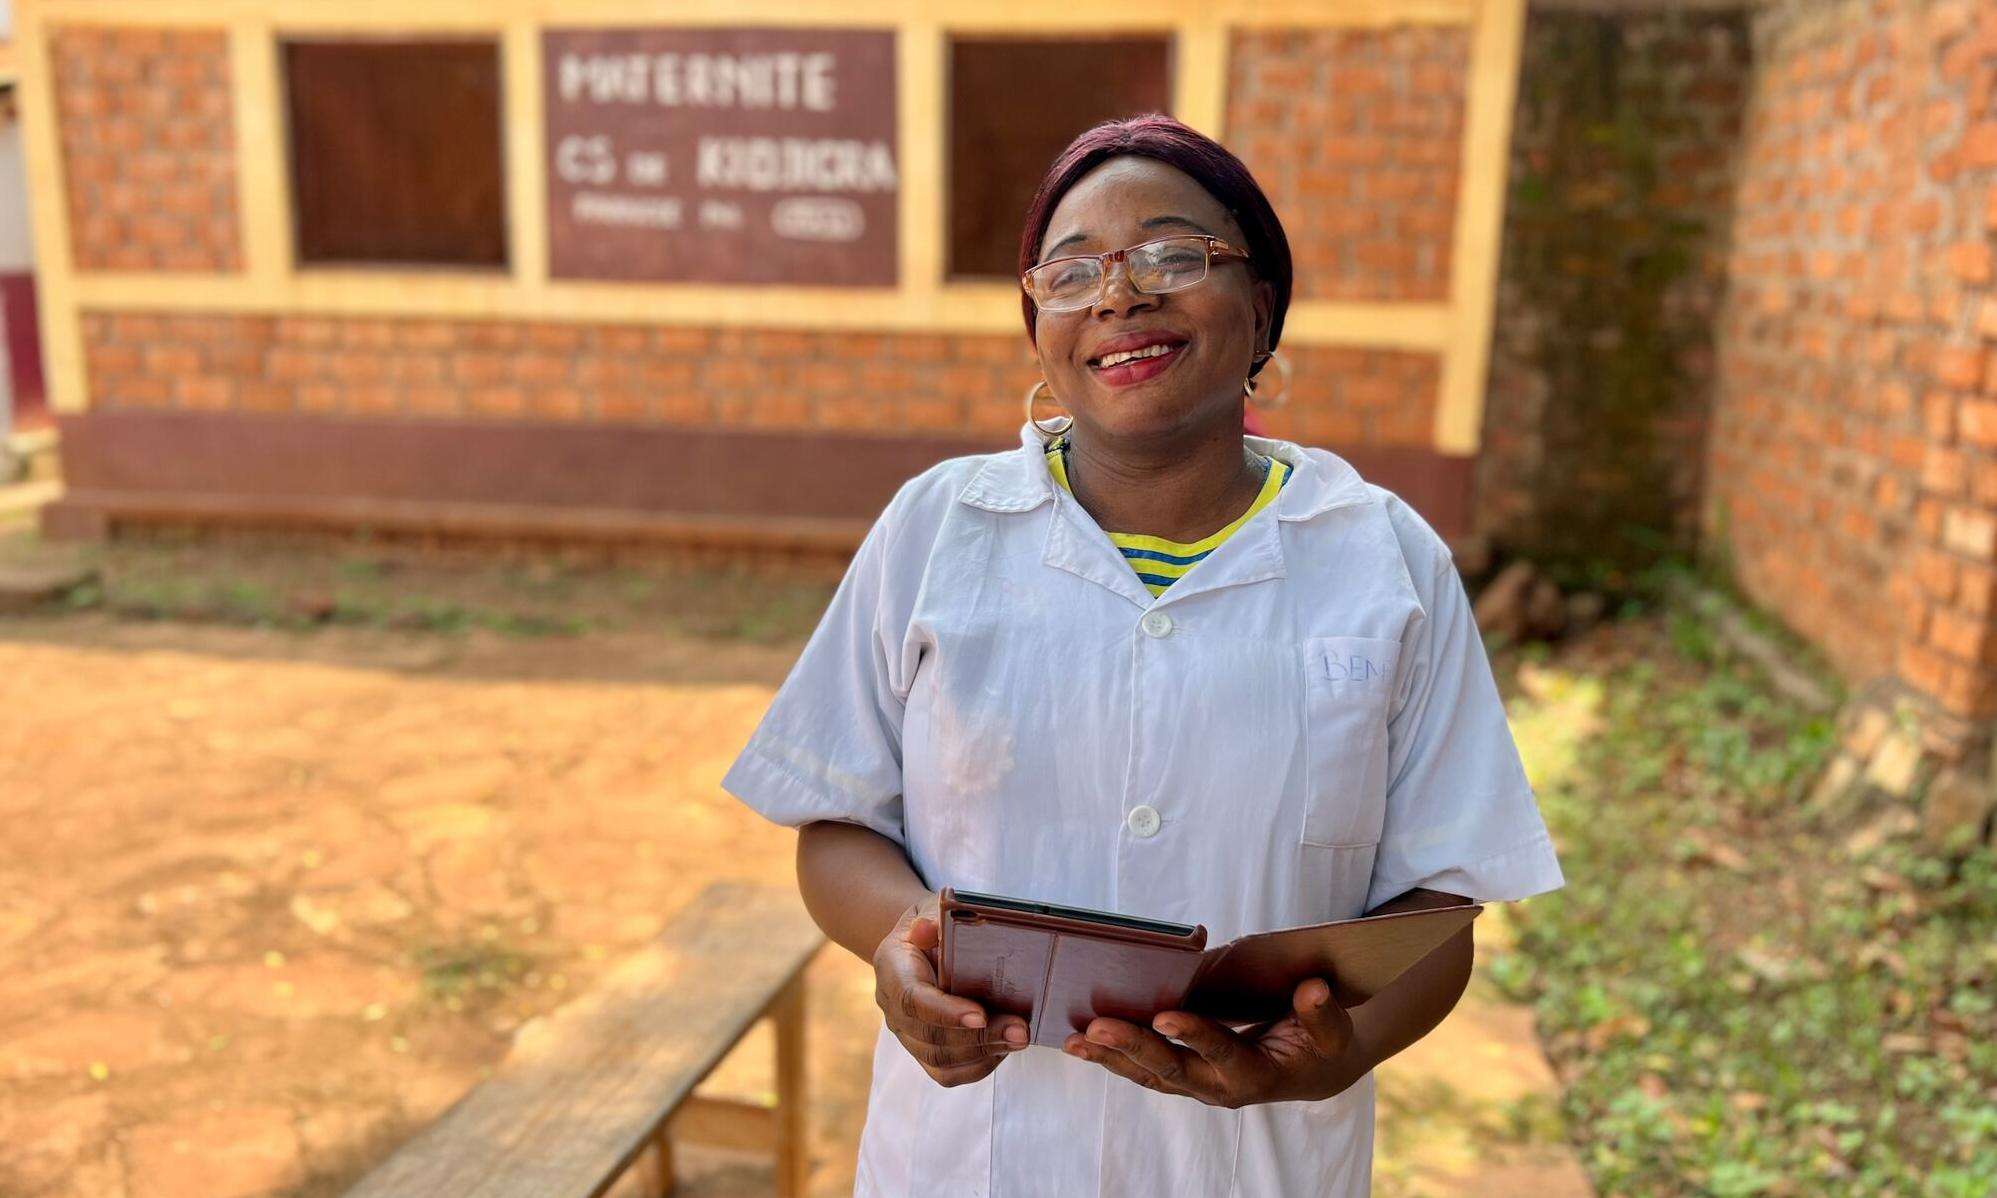 An MSF staff member at the Kidjigra center holds a tablet with the e-CARE application for pediatric consultations in Bambari, Central African Republic.